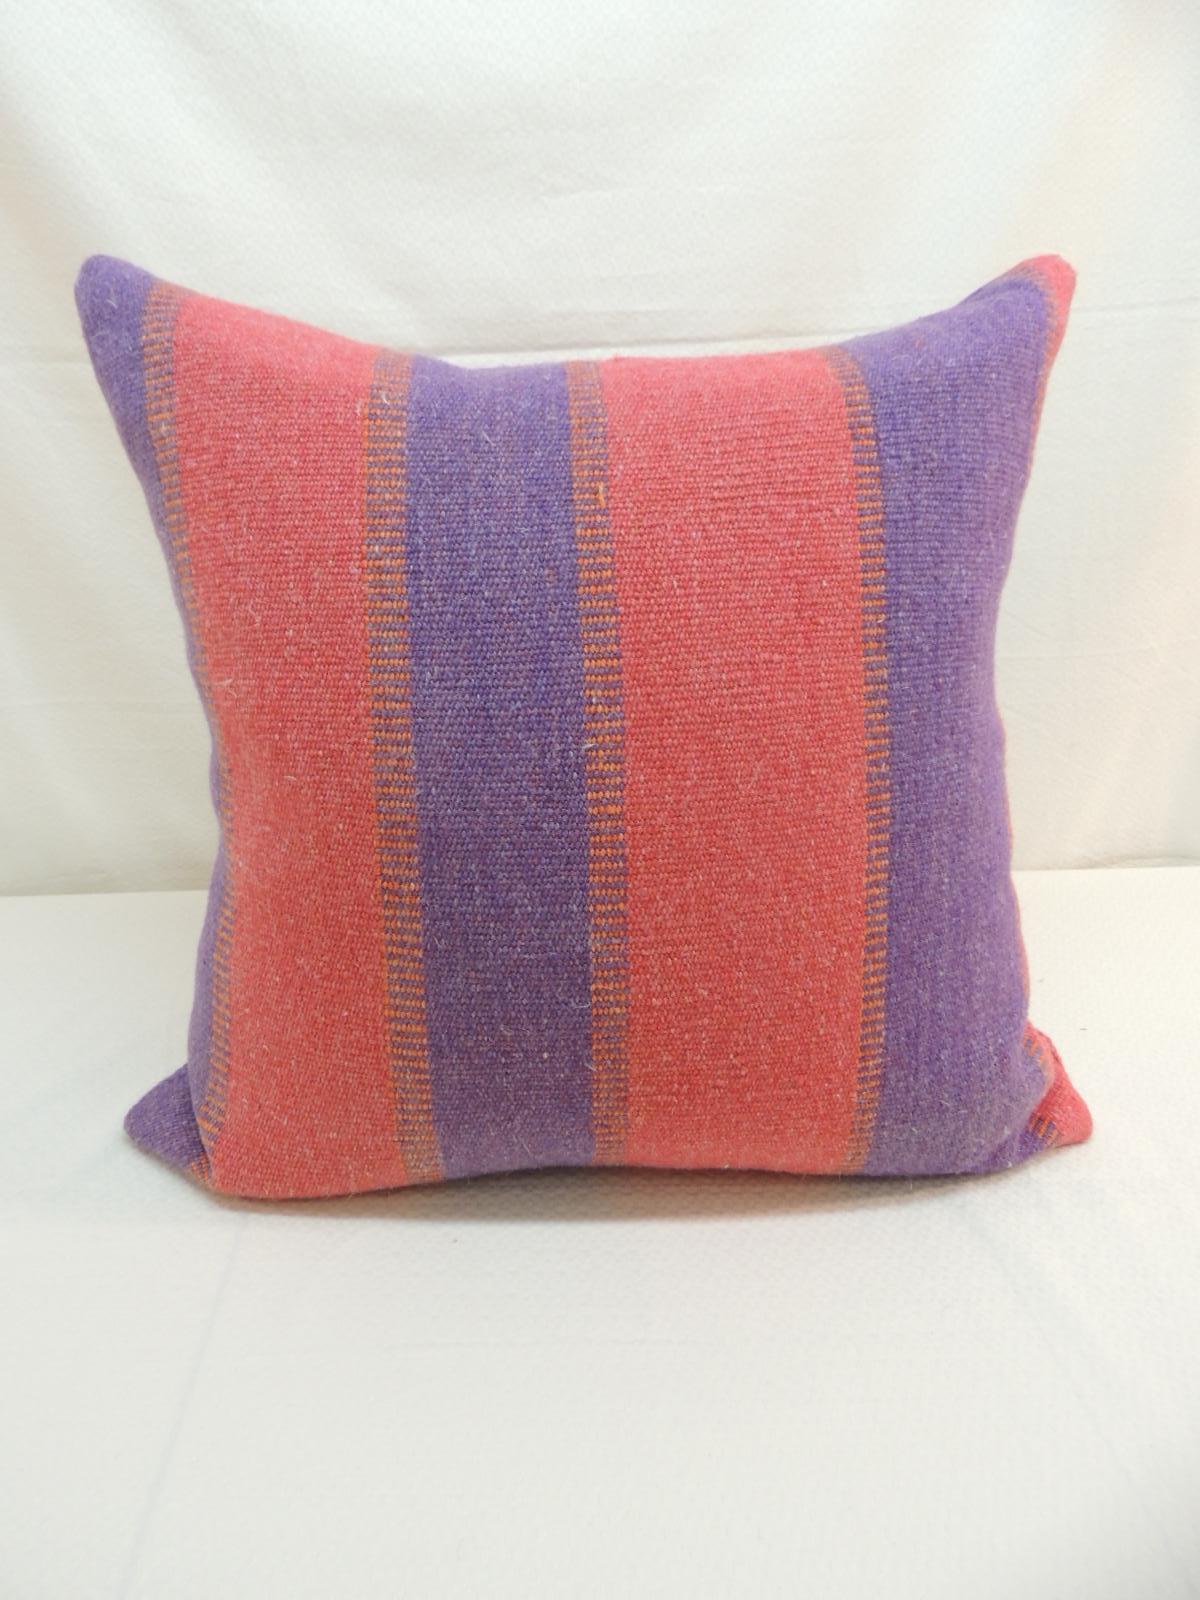 Bohemian Large Wool Argentinian Floor pillow in blue and red Woven Stripes